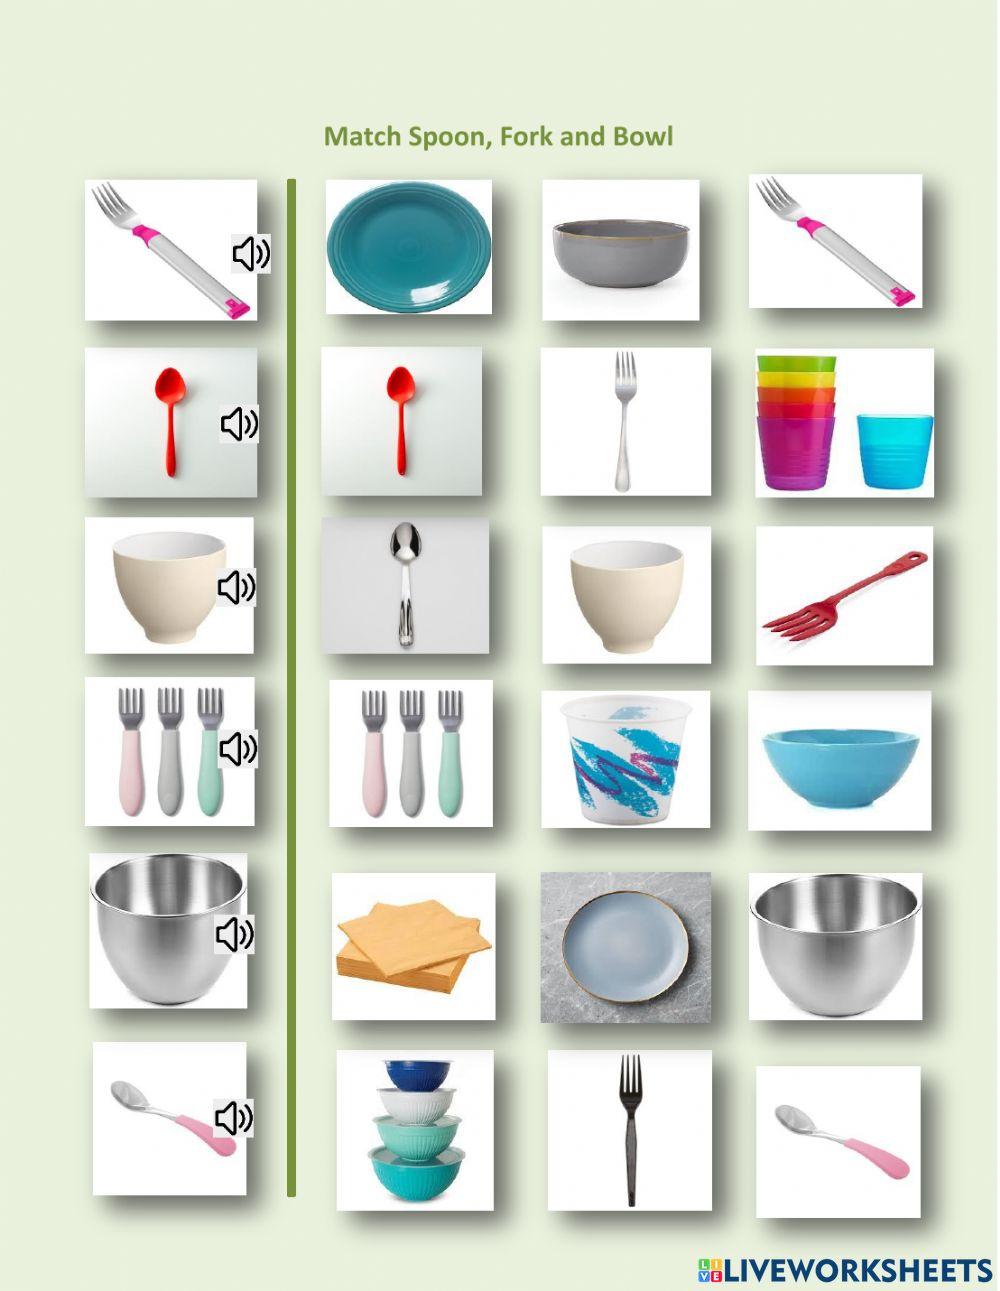 Matching - same picture - spoon, fork, bowl - (1.02)  ET